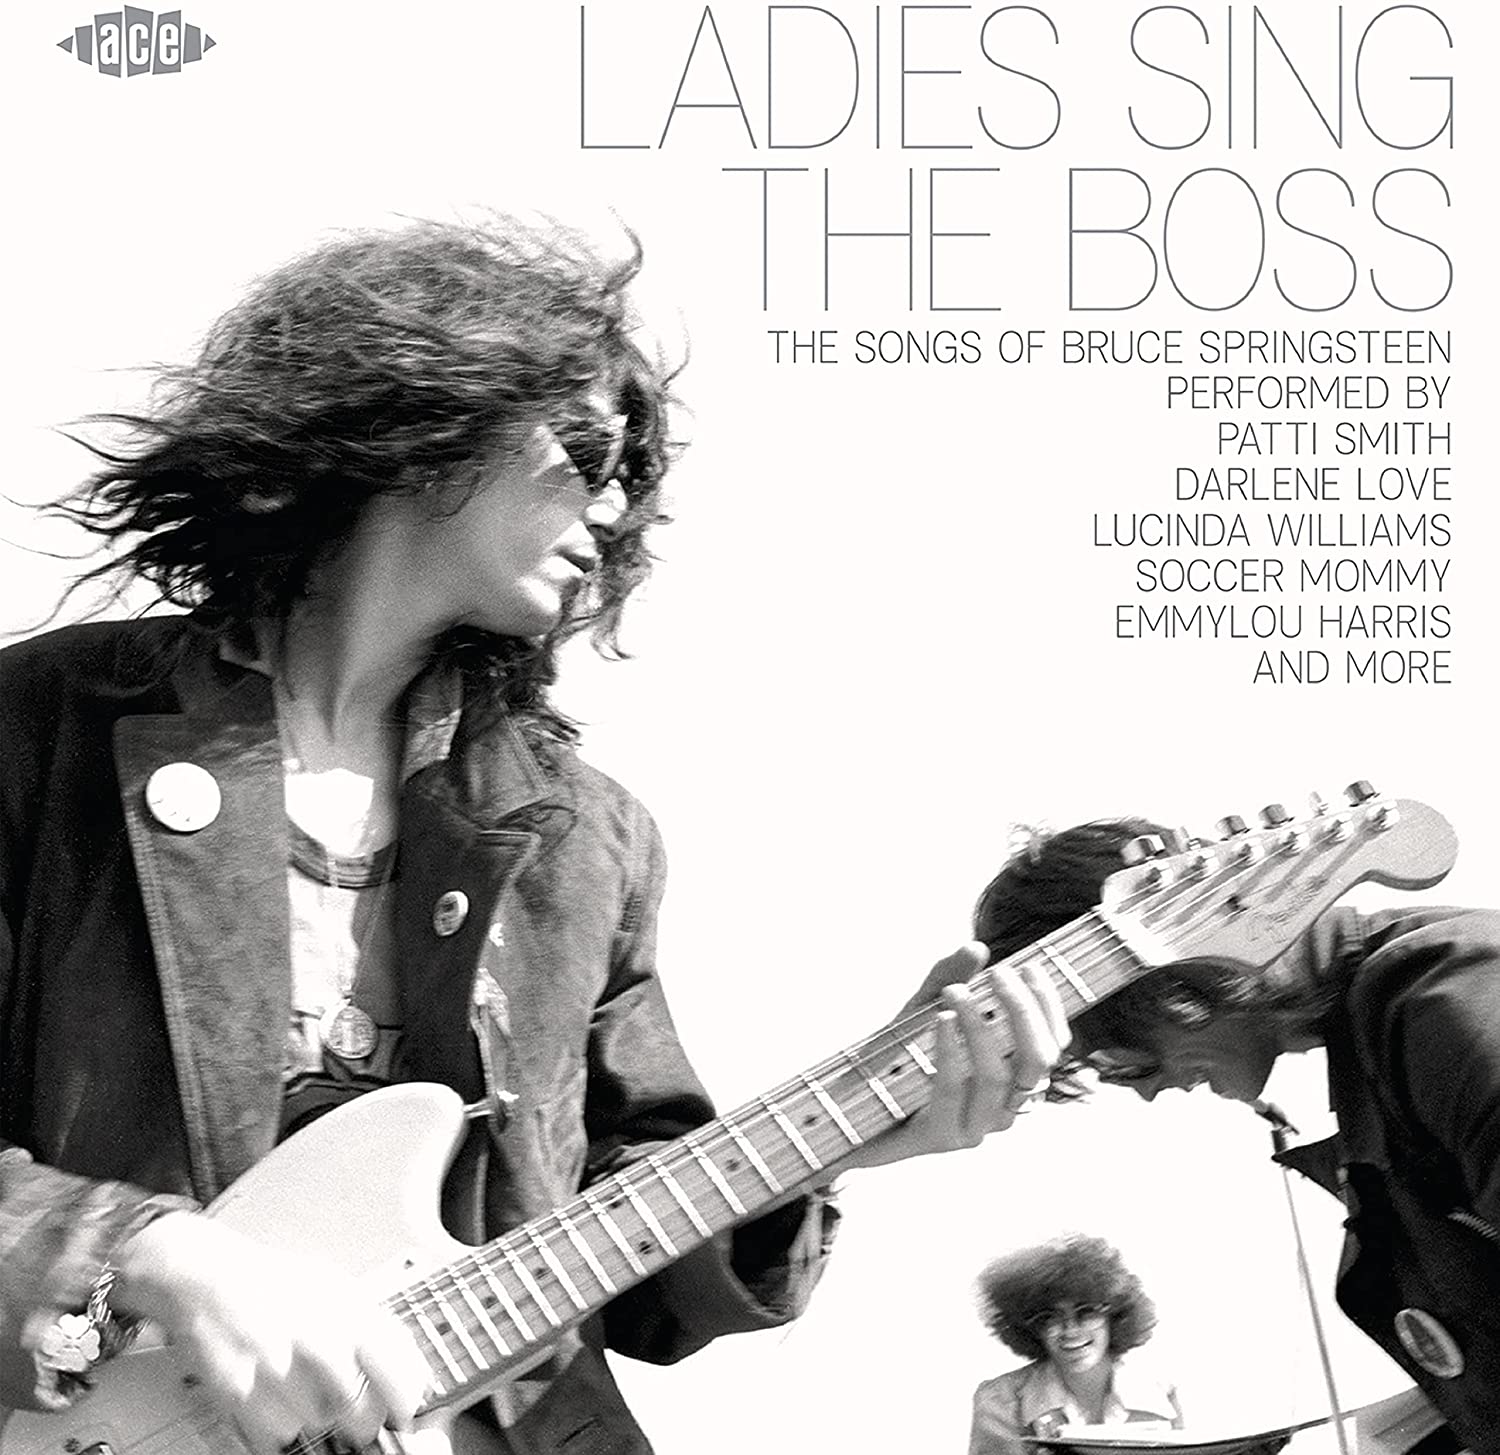 Ladies Sing The Boss - The Songs Of Bruce Springsteen